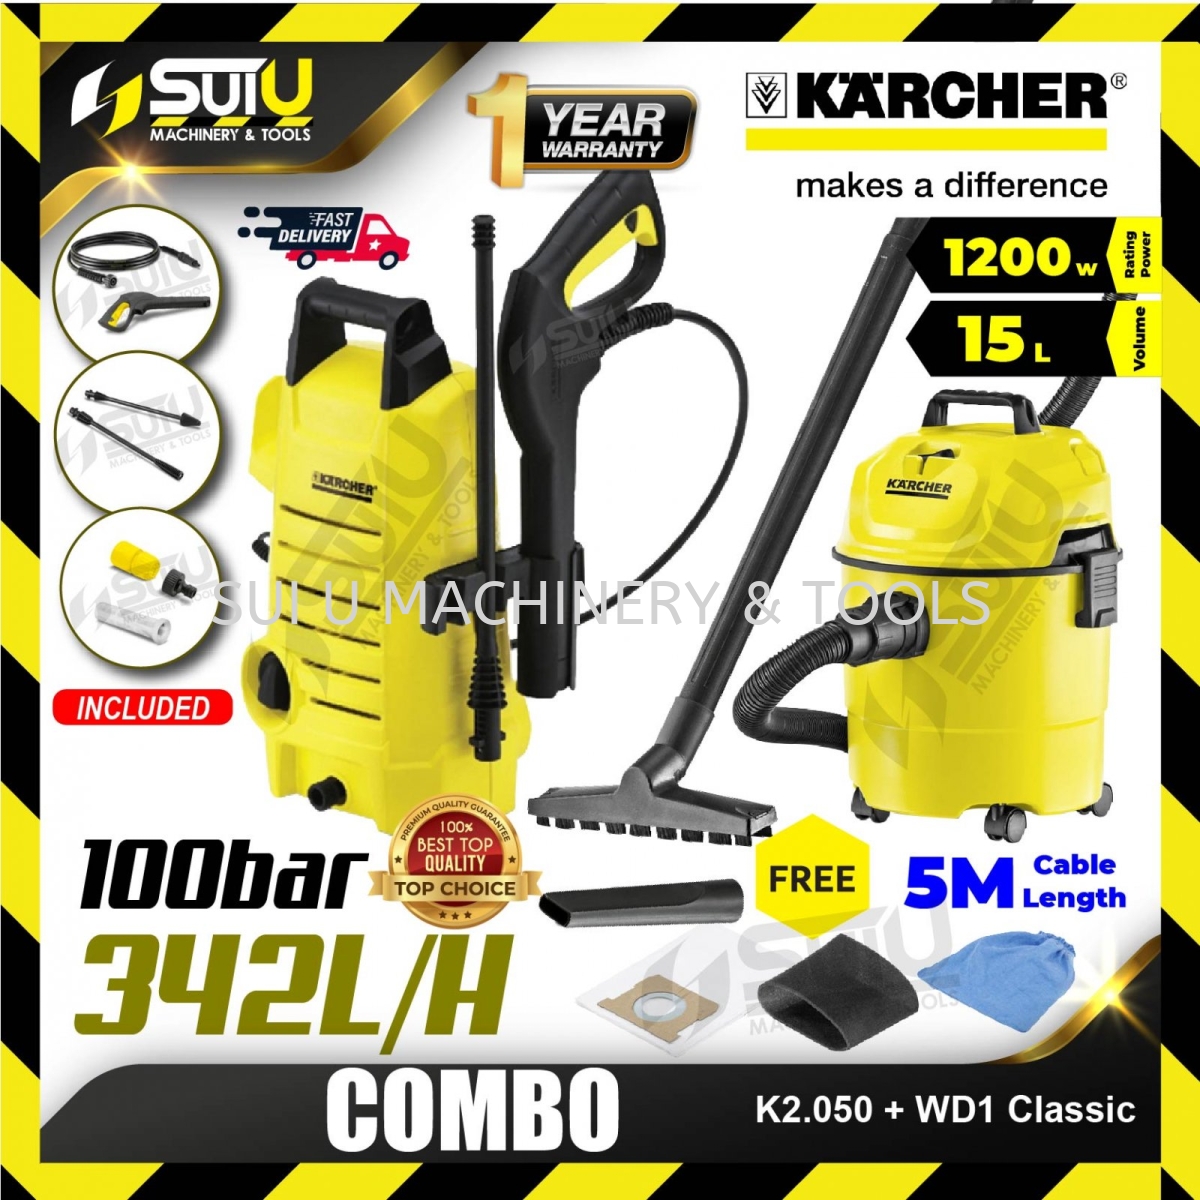 KARCHER COMBO K2.050 100Bar High Pressure Washer + WD1 Classic 15L Wet &  Dry Vacuum